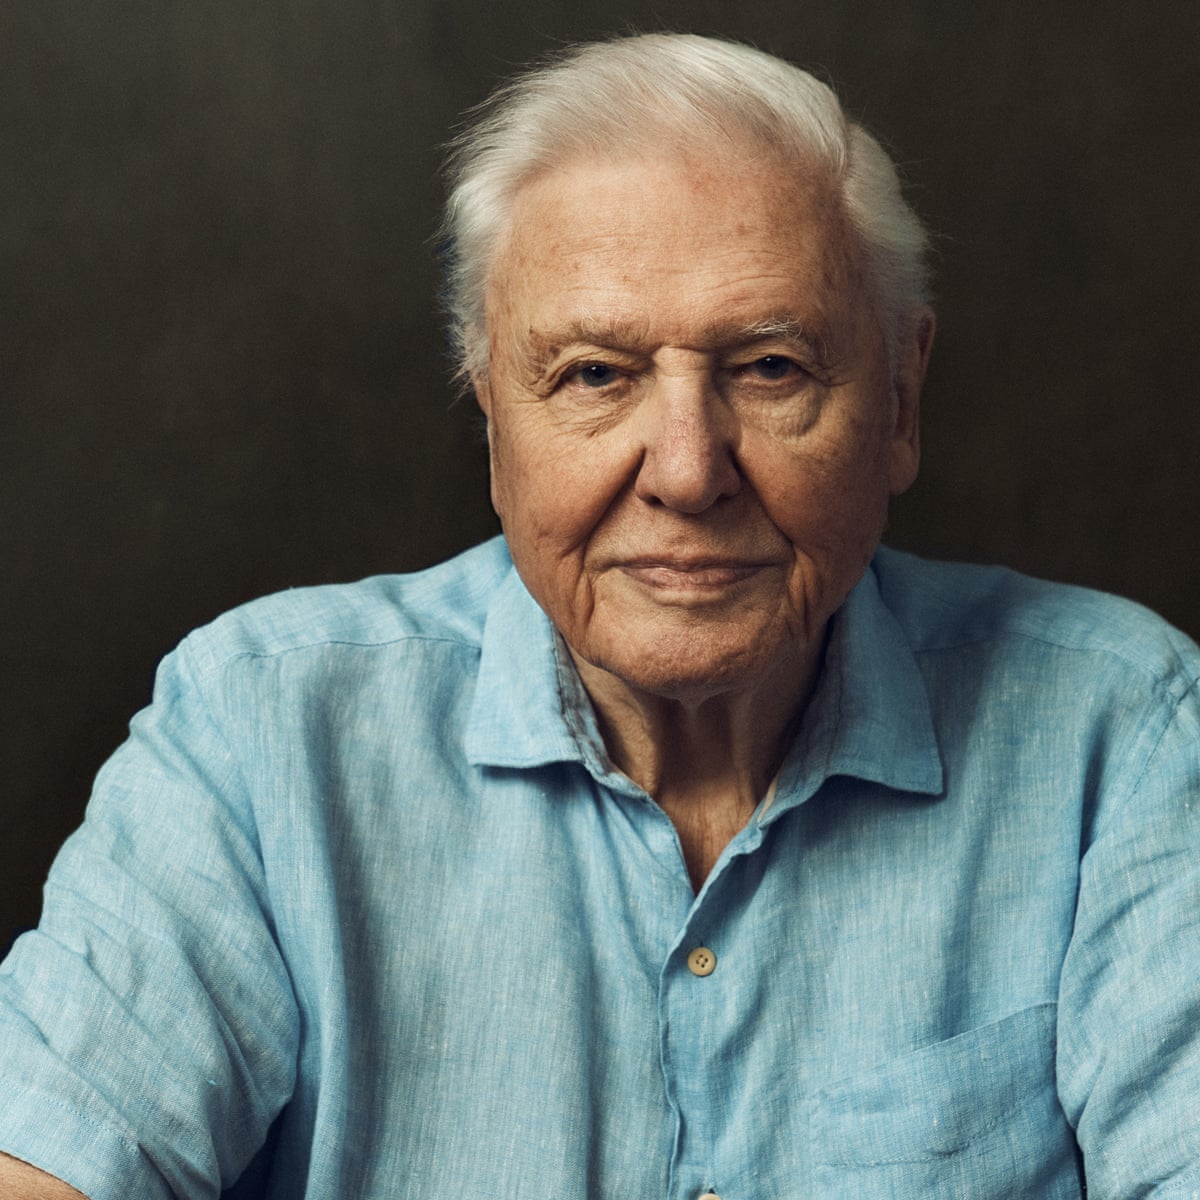 David Attenborough to present third series of Planet Earth | Television | The Guardian